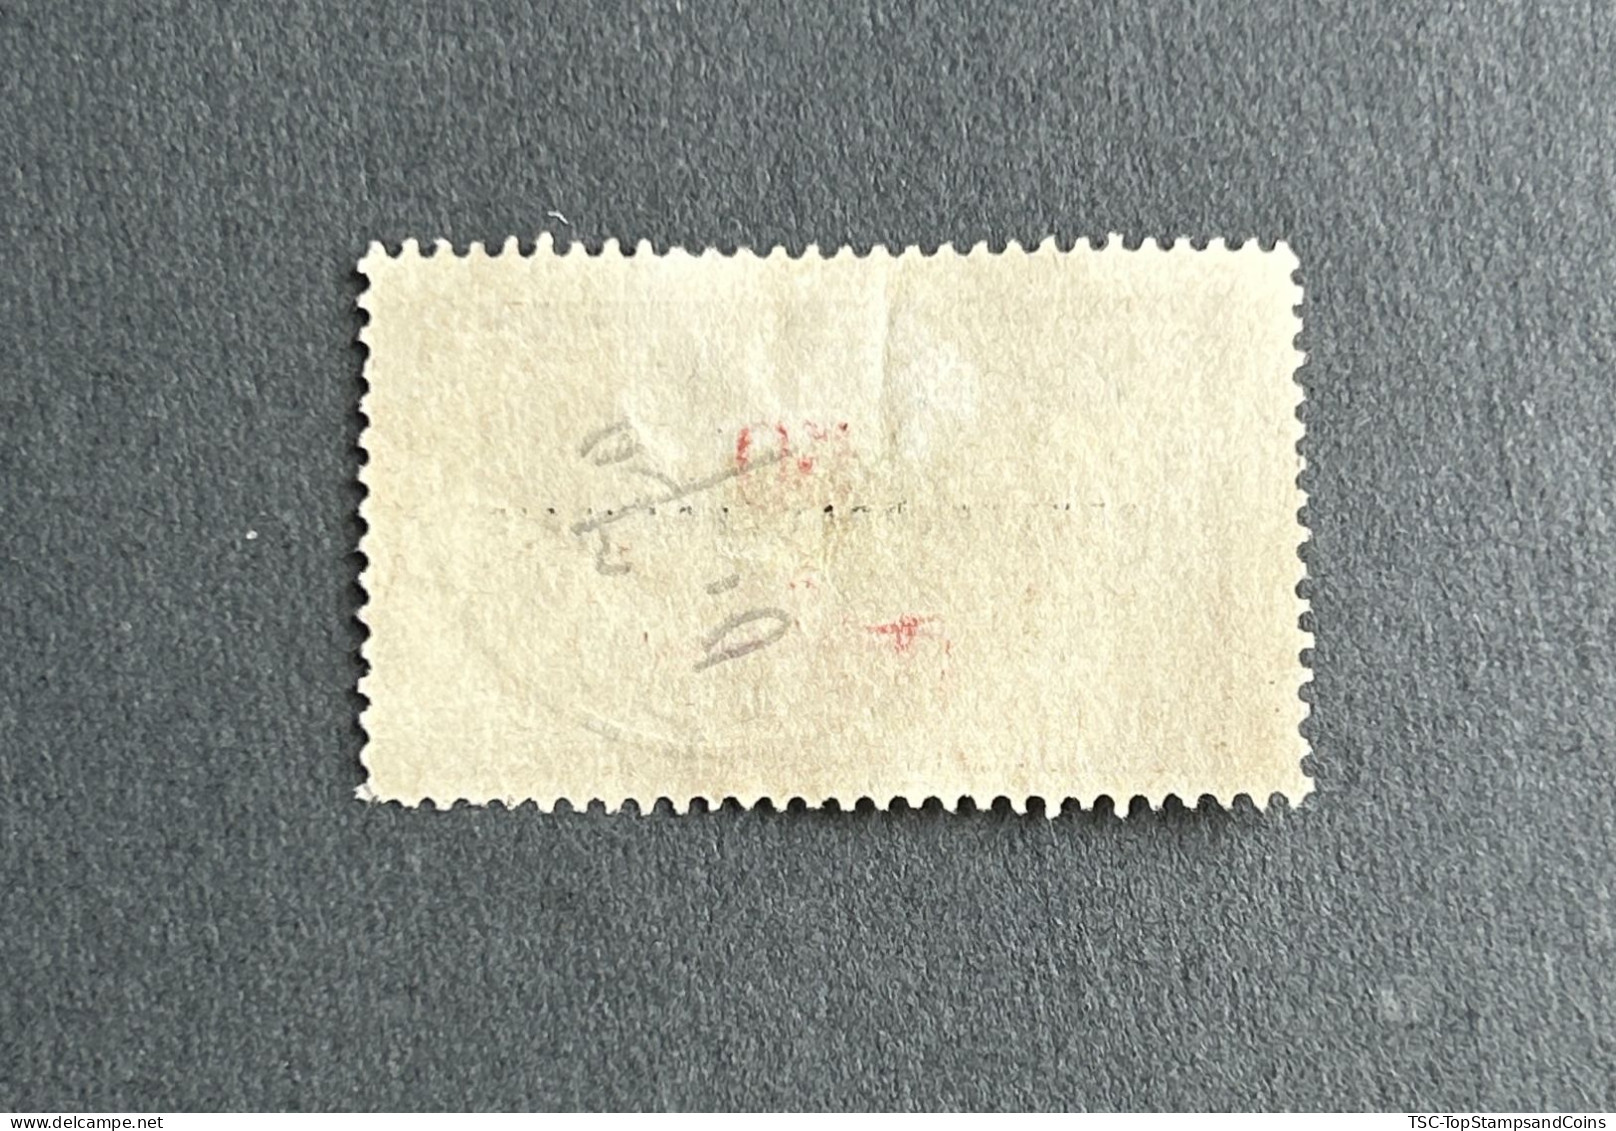 FRMA0050U1 - Type Merson Surcharged With Overprint "Protectorat Français" - 50 C Used Stamp - Morocco - 1914 - Gebruikt